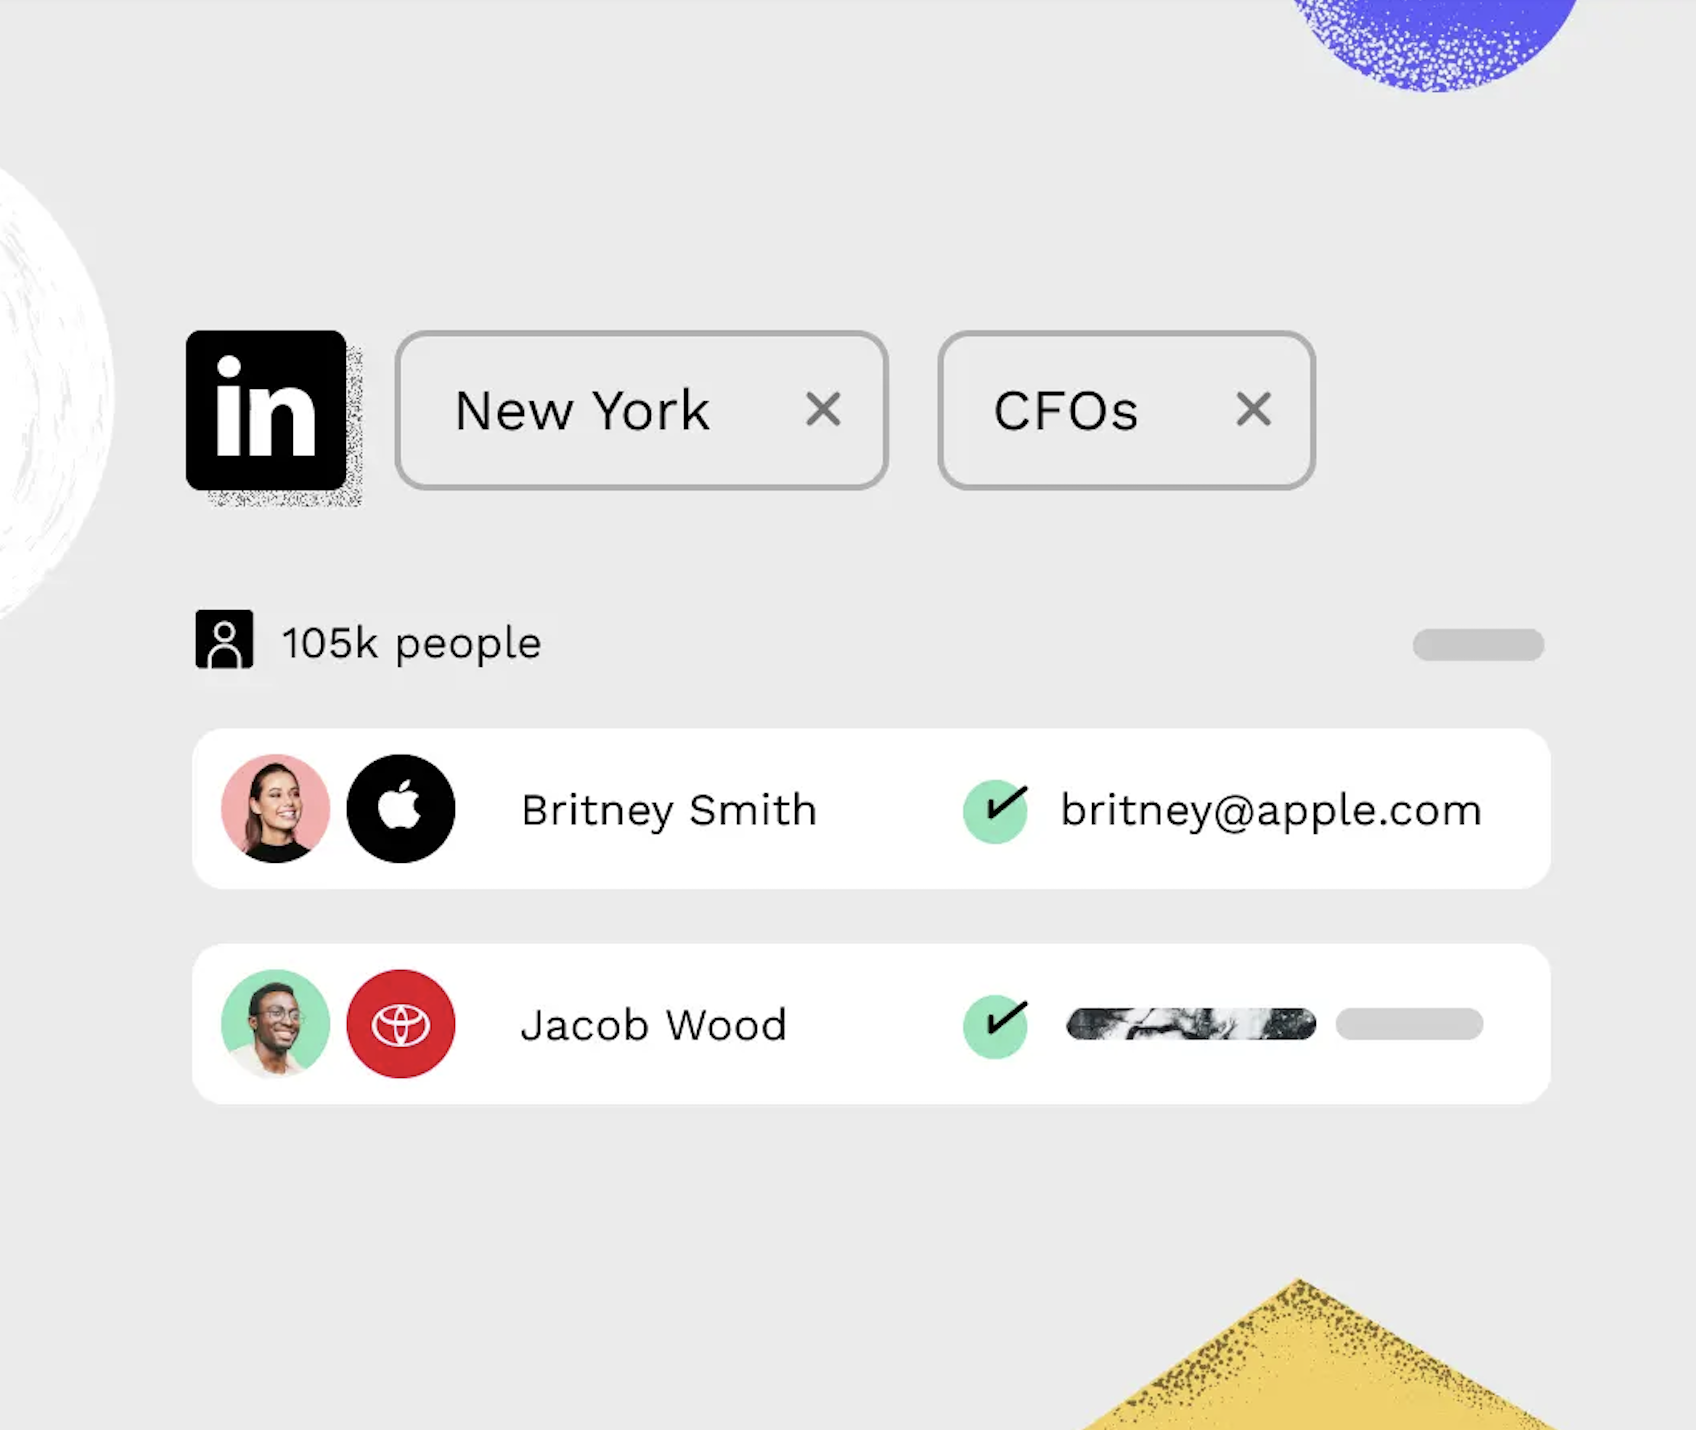 Wiza sample contacts for CFOs in New York